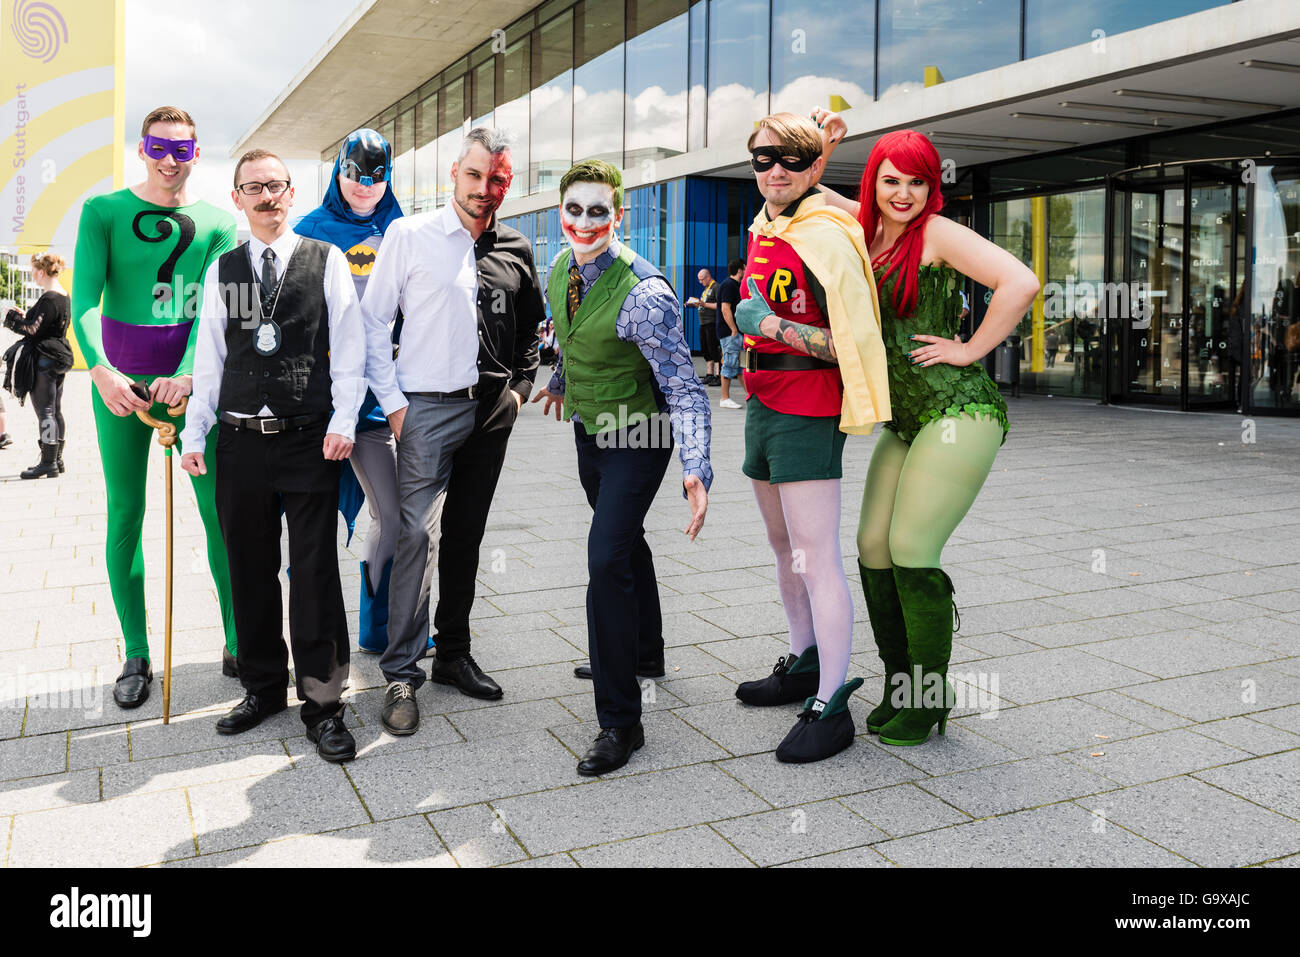 Stuttgart, Germany - June 25, 2016: Several cosplayers are posing during the Comic Con Germany event in Stuttgart in front of th Stock Photo